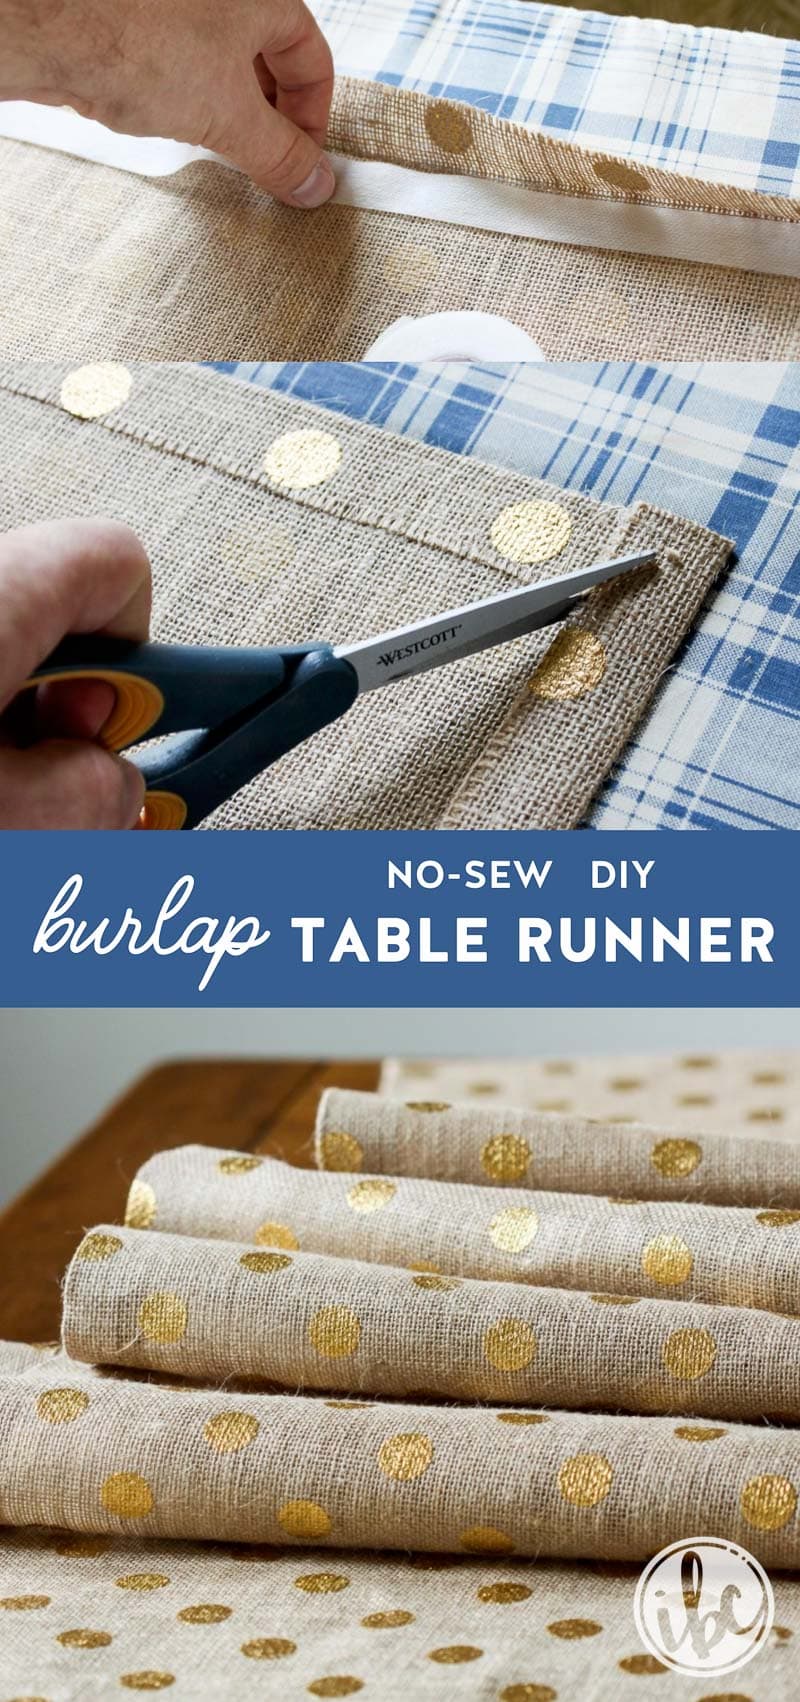 Step-by-step tutorial for making a no-sew DIY burlap table runner. #burlap #table #runner